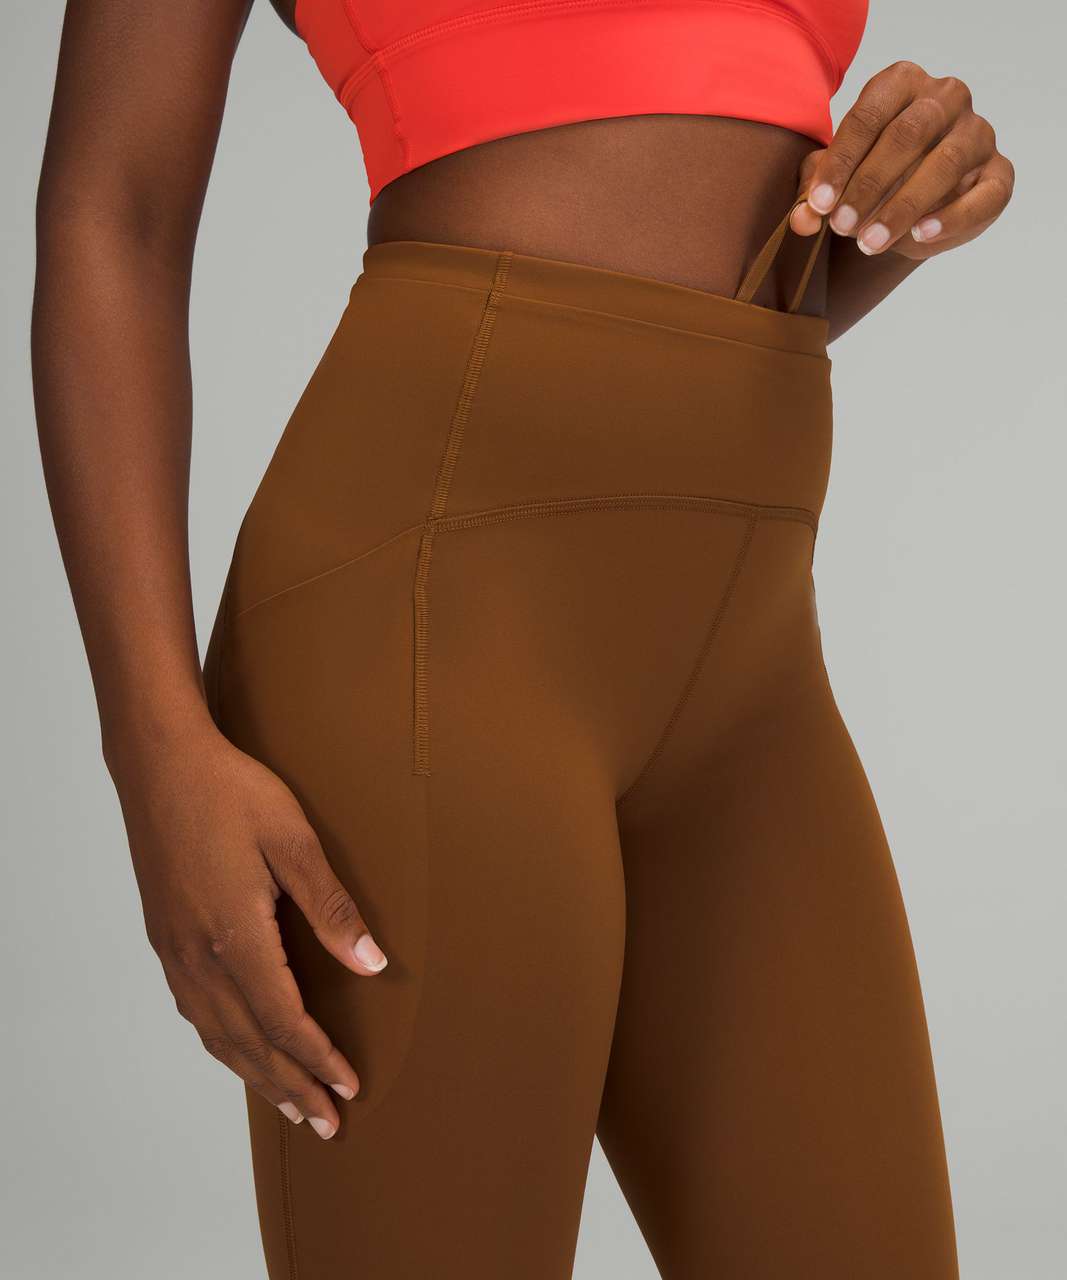 Lululemon Swift Speed High-Rise Tight 28" - Copper Brown